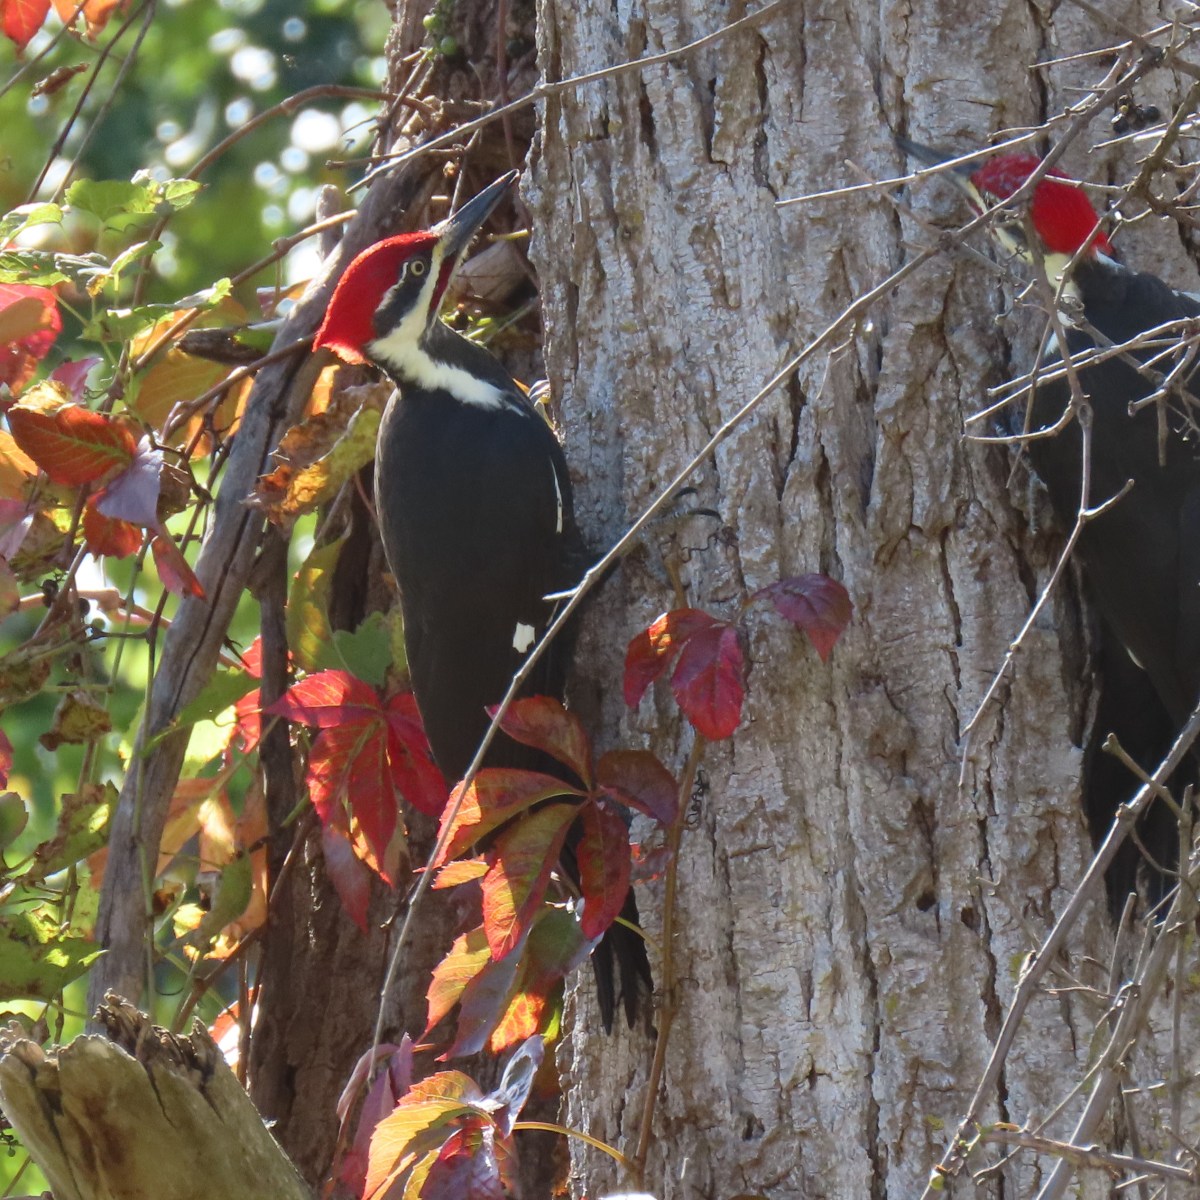 Pileated woodpecker with fall leaves